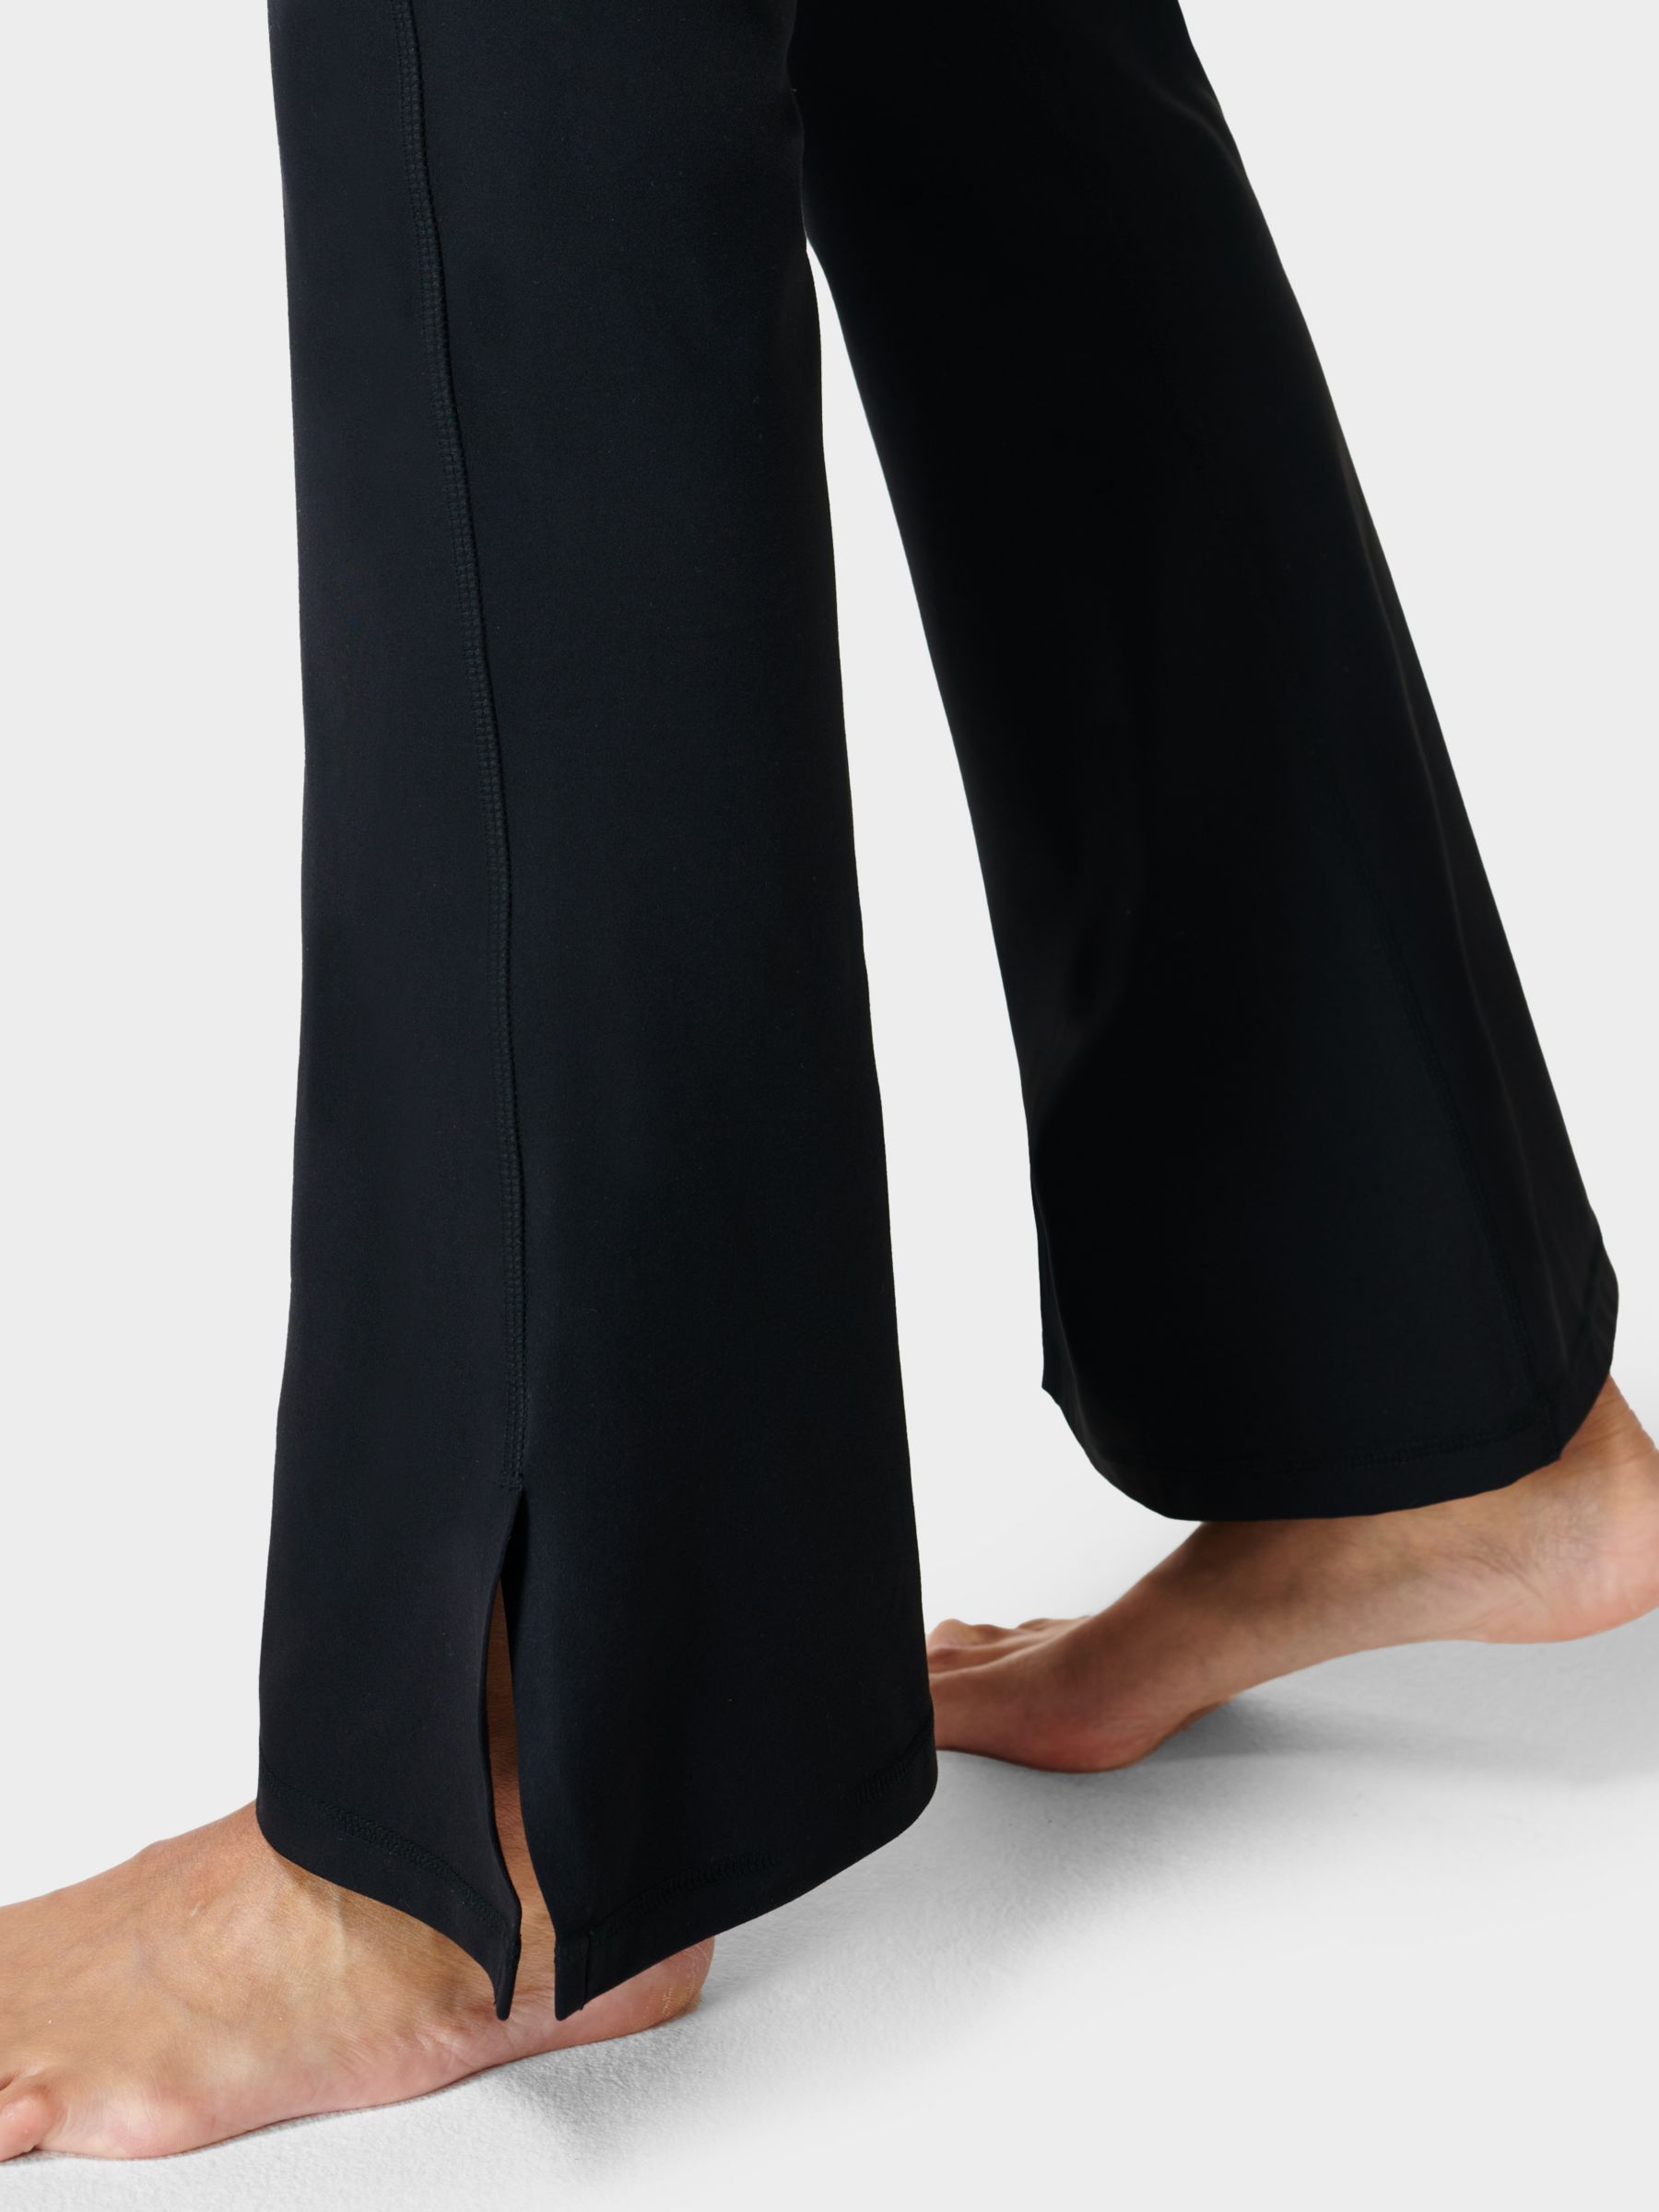 Buy Sweaty Betty Black Super Soft Flare 30 Yoga Trousers from